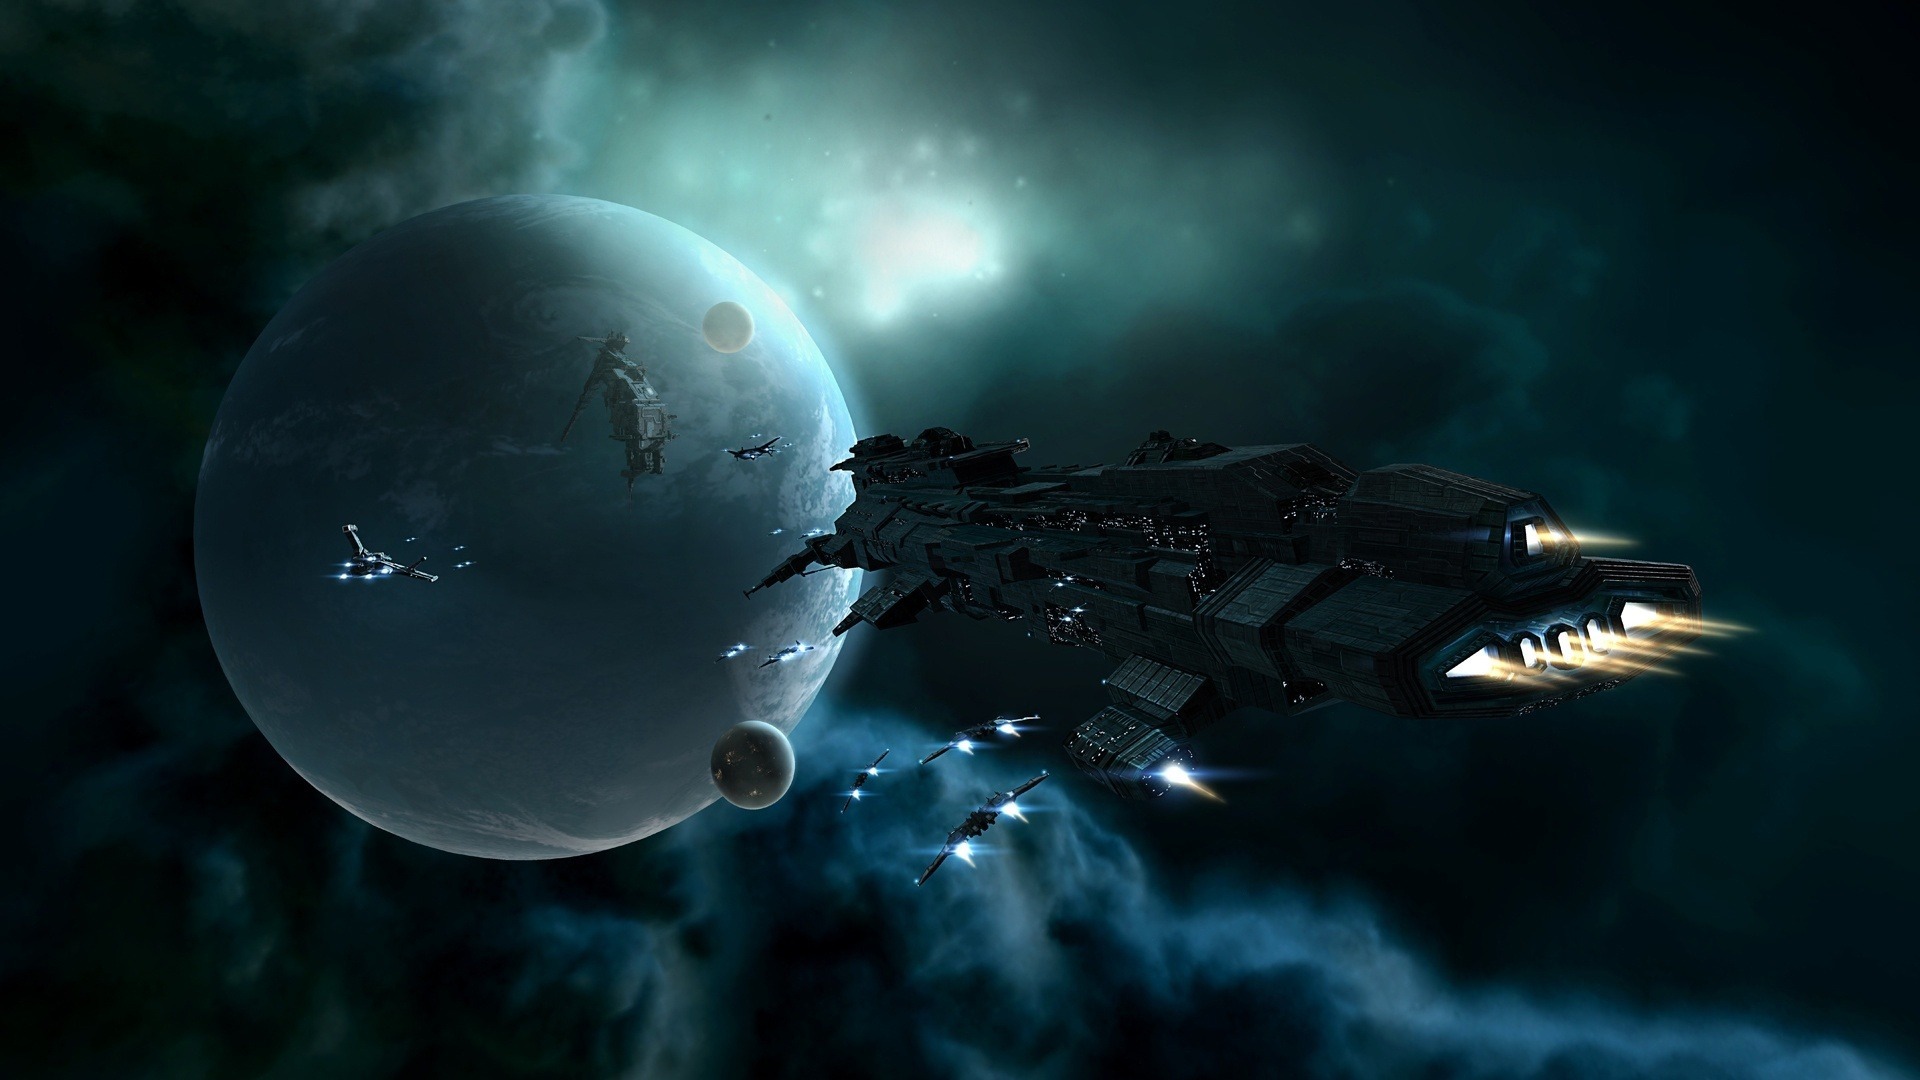 eve, Online, Sci fi, Space, Futuristic, Spaceship, Spacecraft, Planets, Moon, Stars Wallpaper